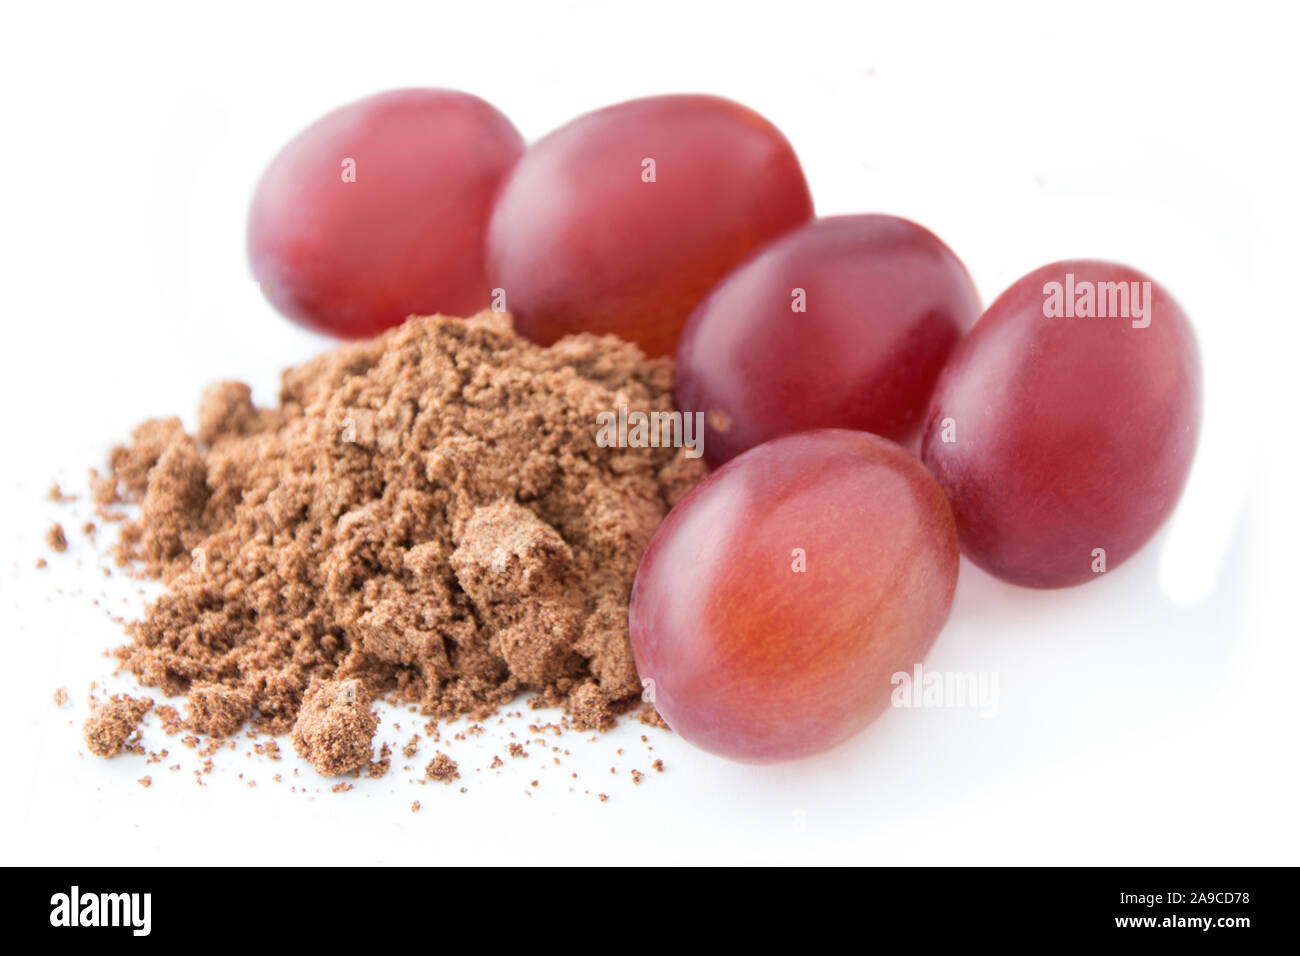 Grape seed powder and grapes Stock Photo